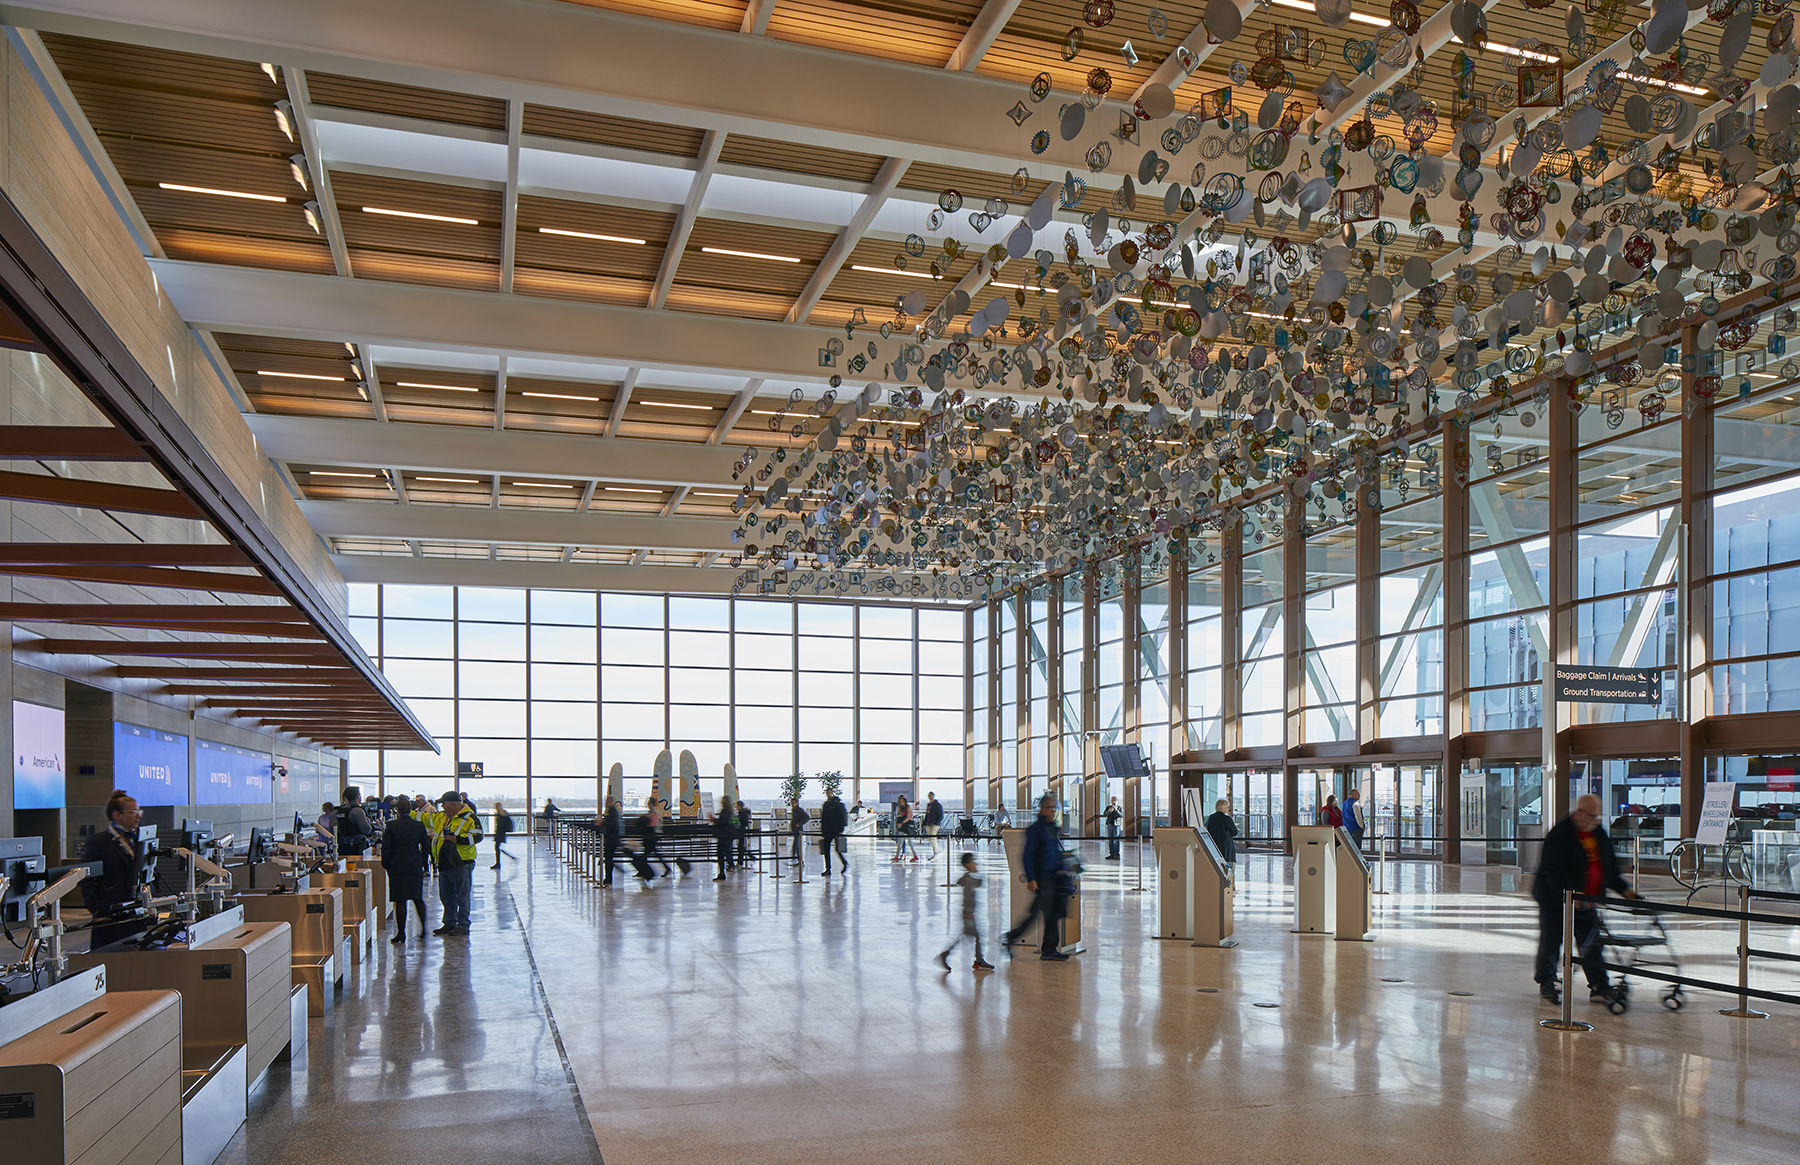 Natural wood ceilings are meant to impart a hardworking, pragmatic, and warm Midwestern touch to the airport’s design. (Image courtesy of Lucas Blair Simpson/© SOM)